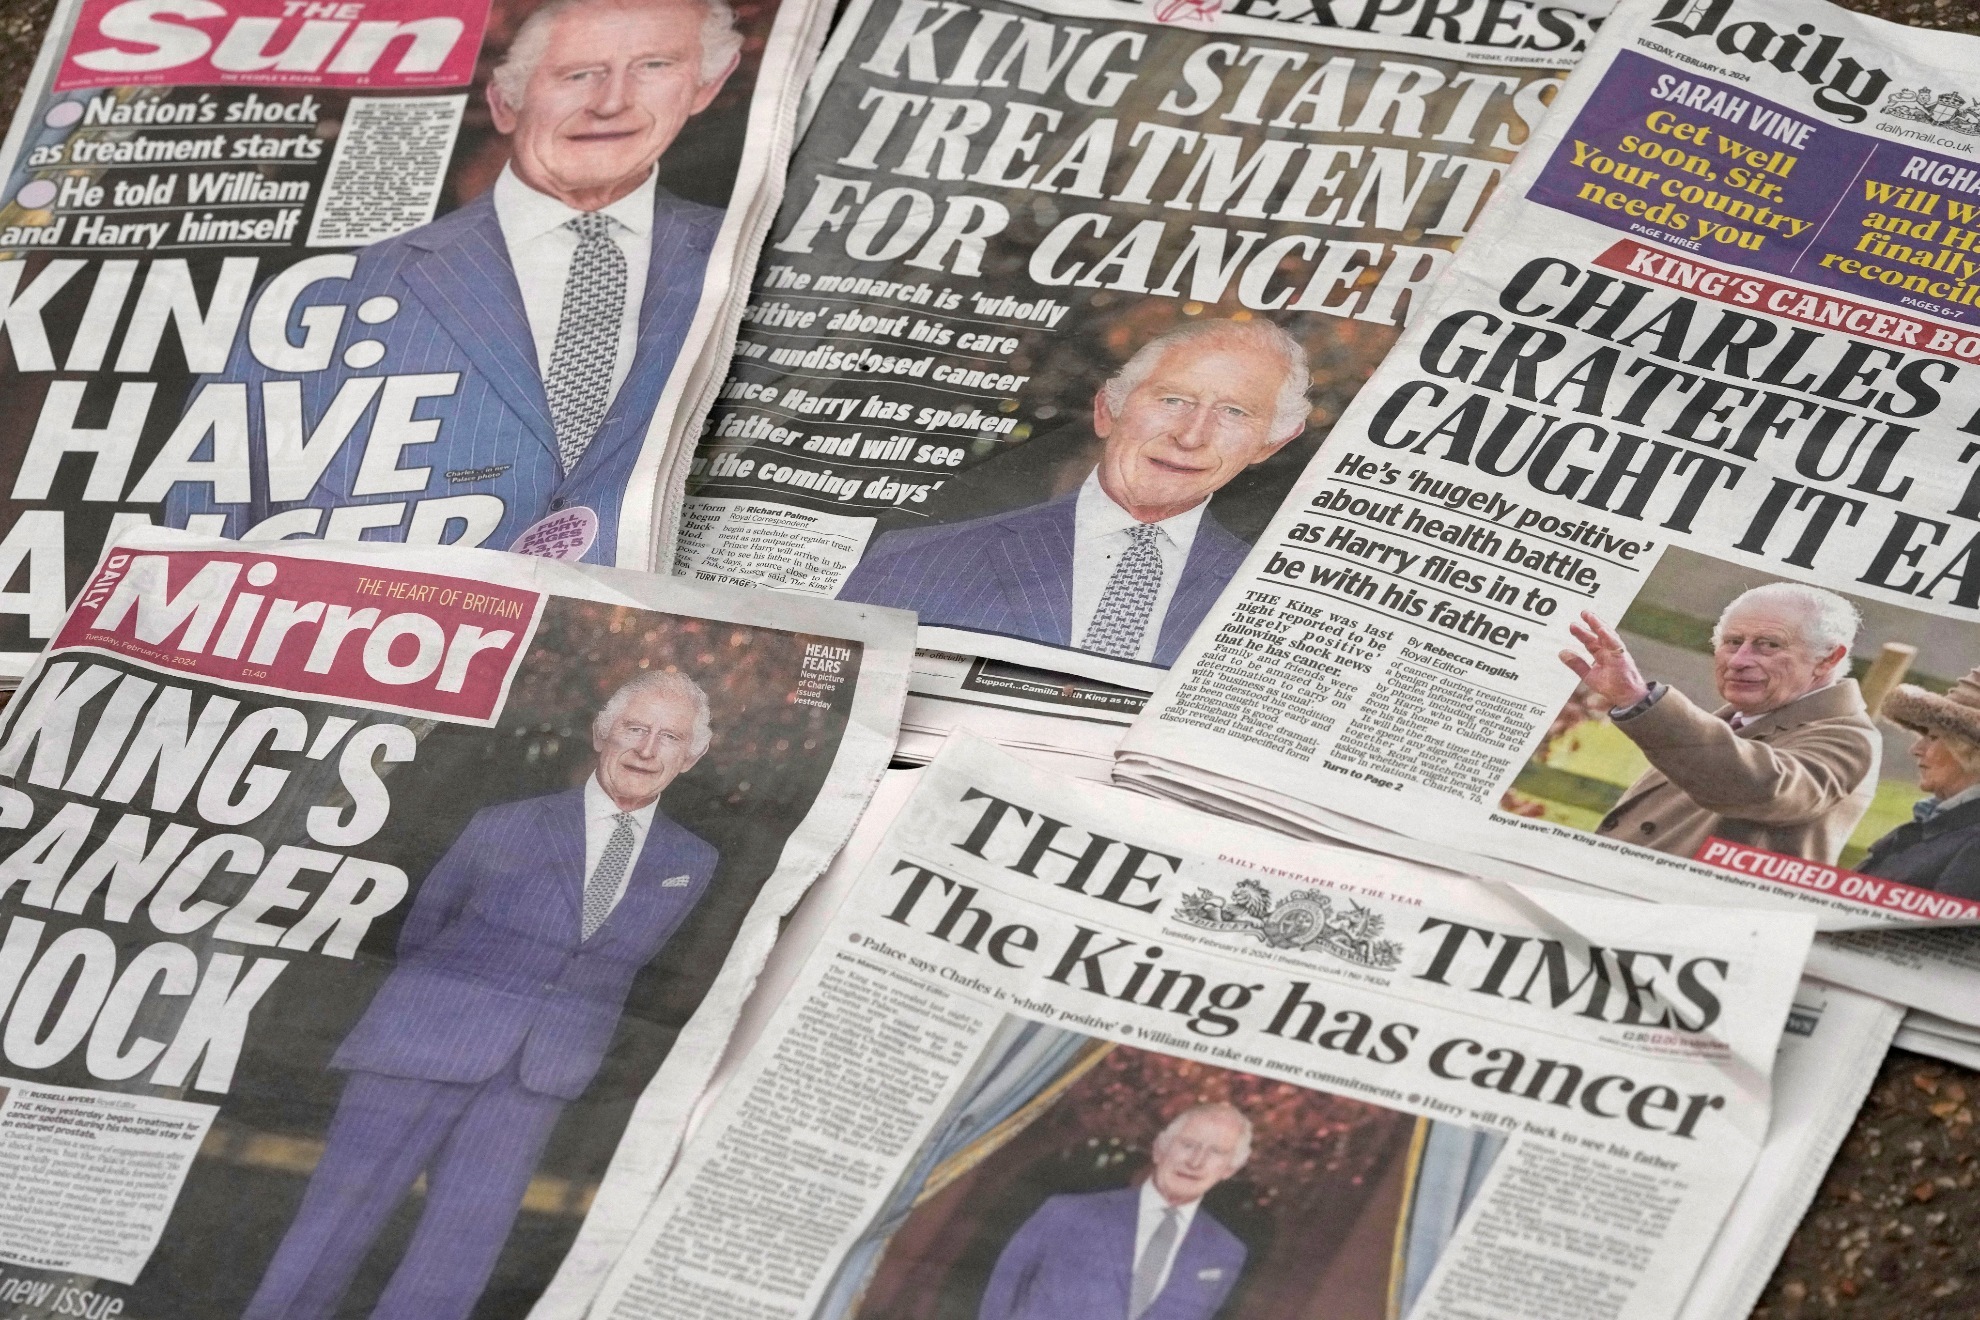 British news papers announce King Charles IIIs cancer diagnosis